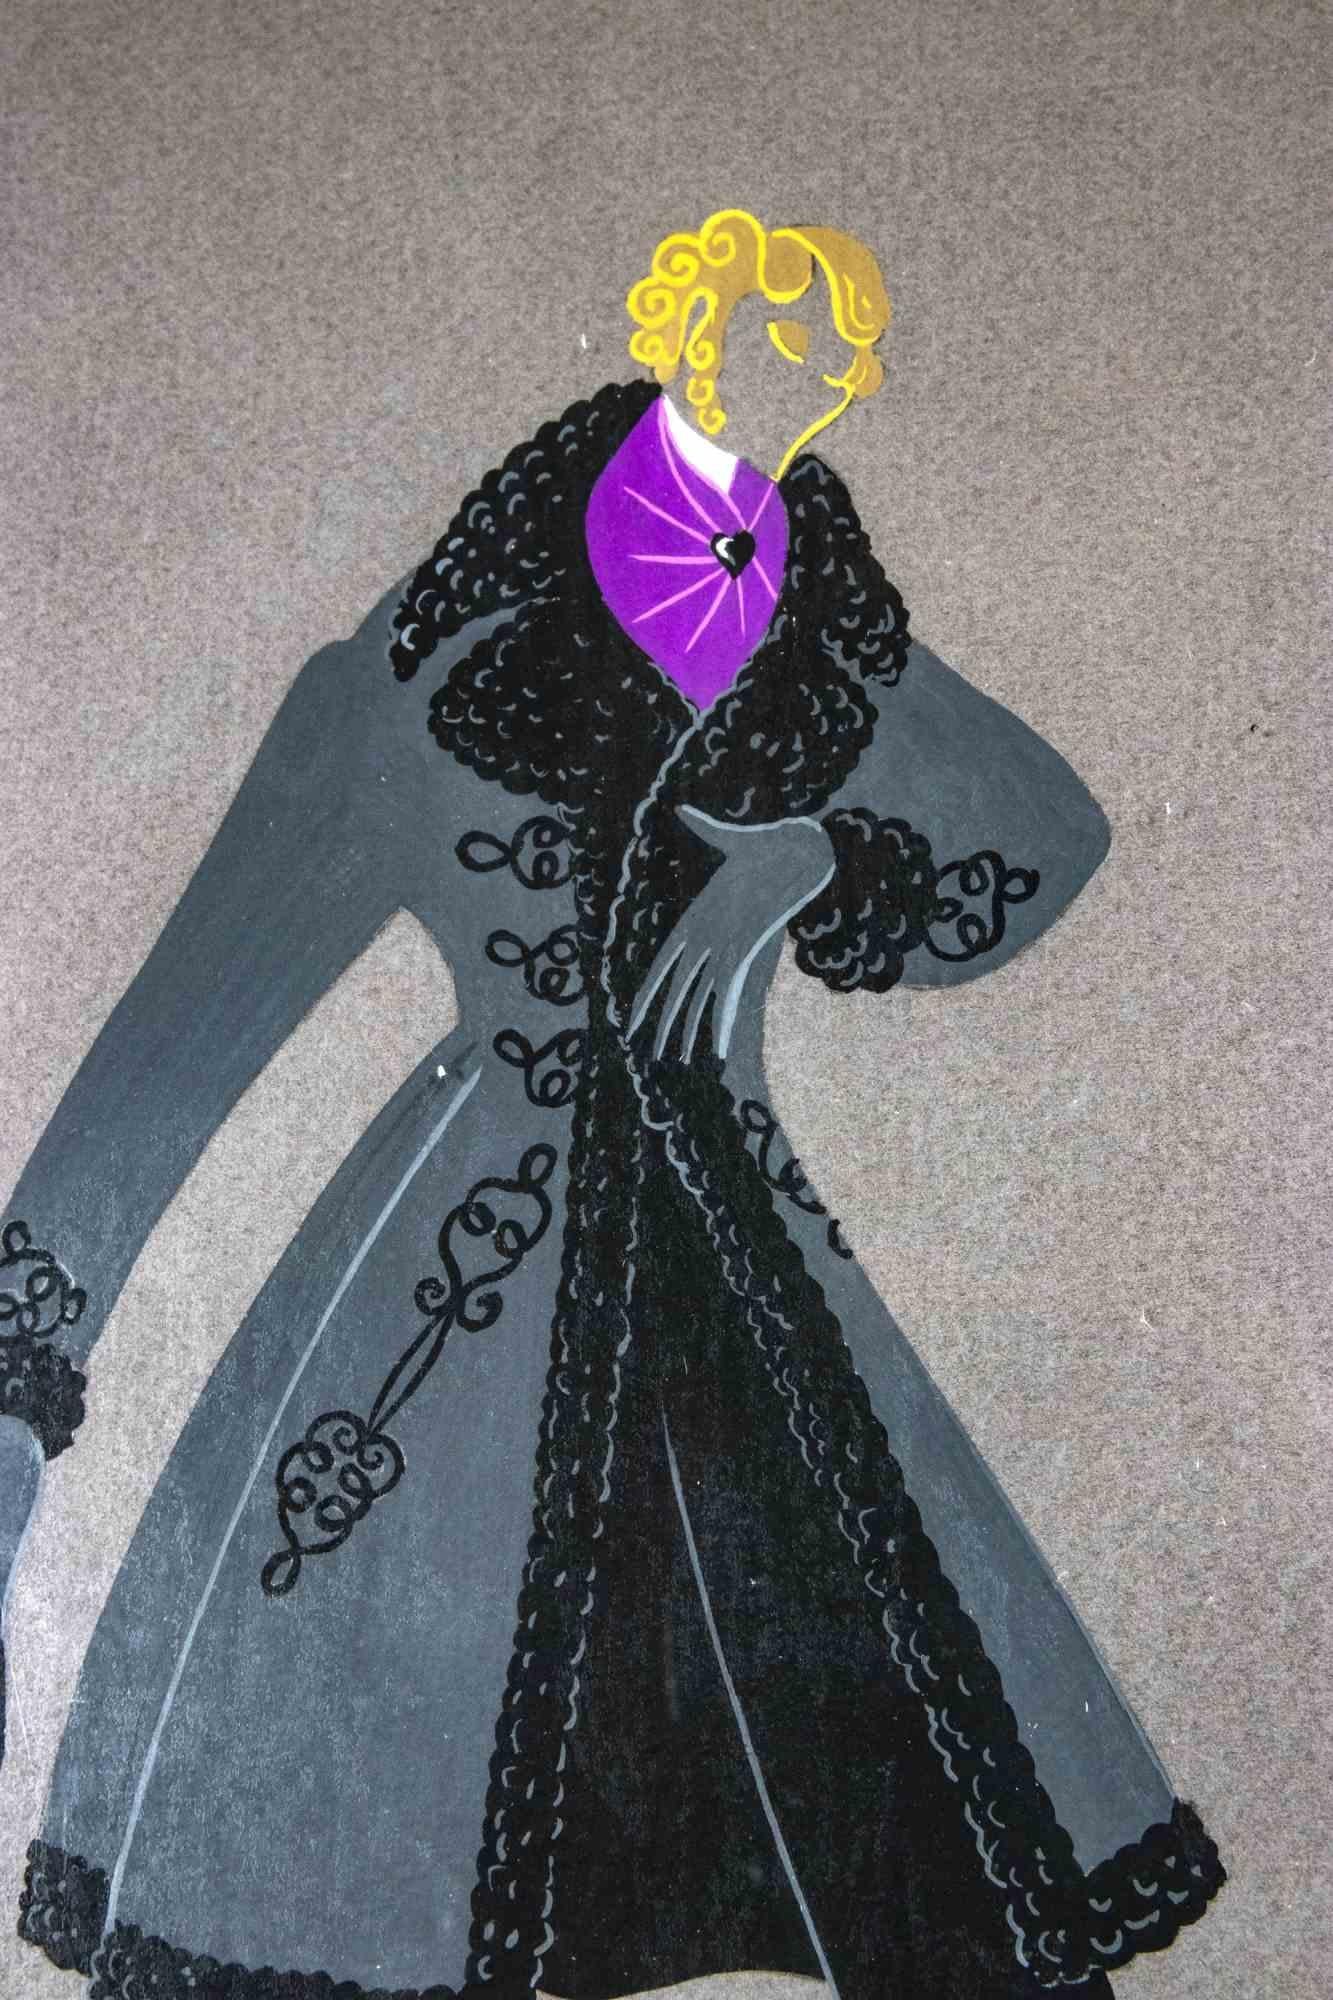 La Traviata - Rodolphe - 4th act is a modern artwork realized in 1948 century by Erté (Romain de Tirtoff).

Mixed colored gouache on paper.

Hand signed on the lower margin. 

Titled and numbered 